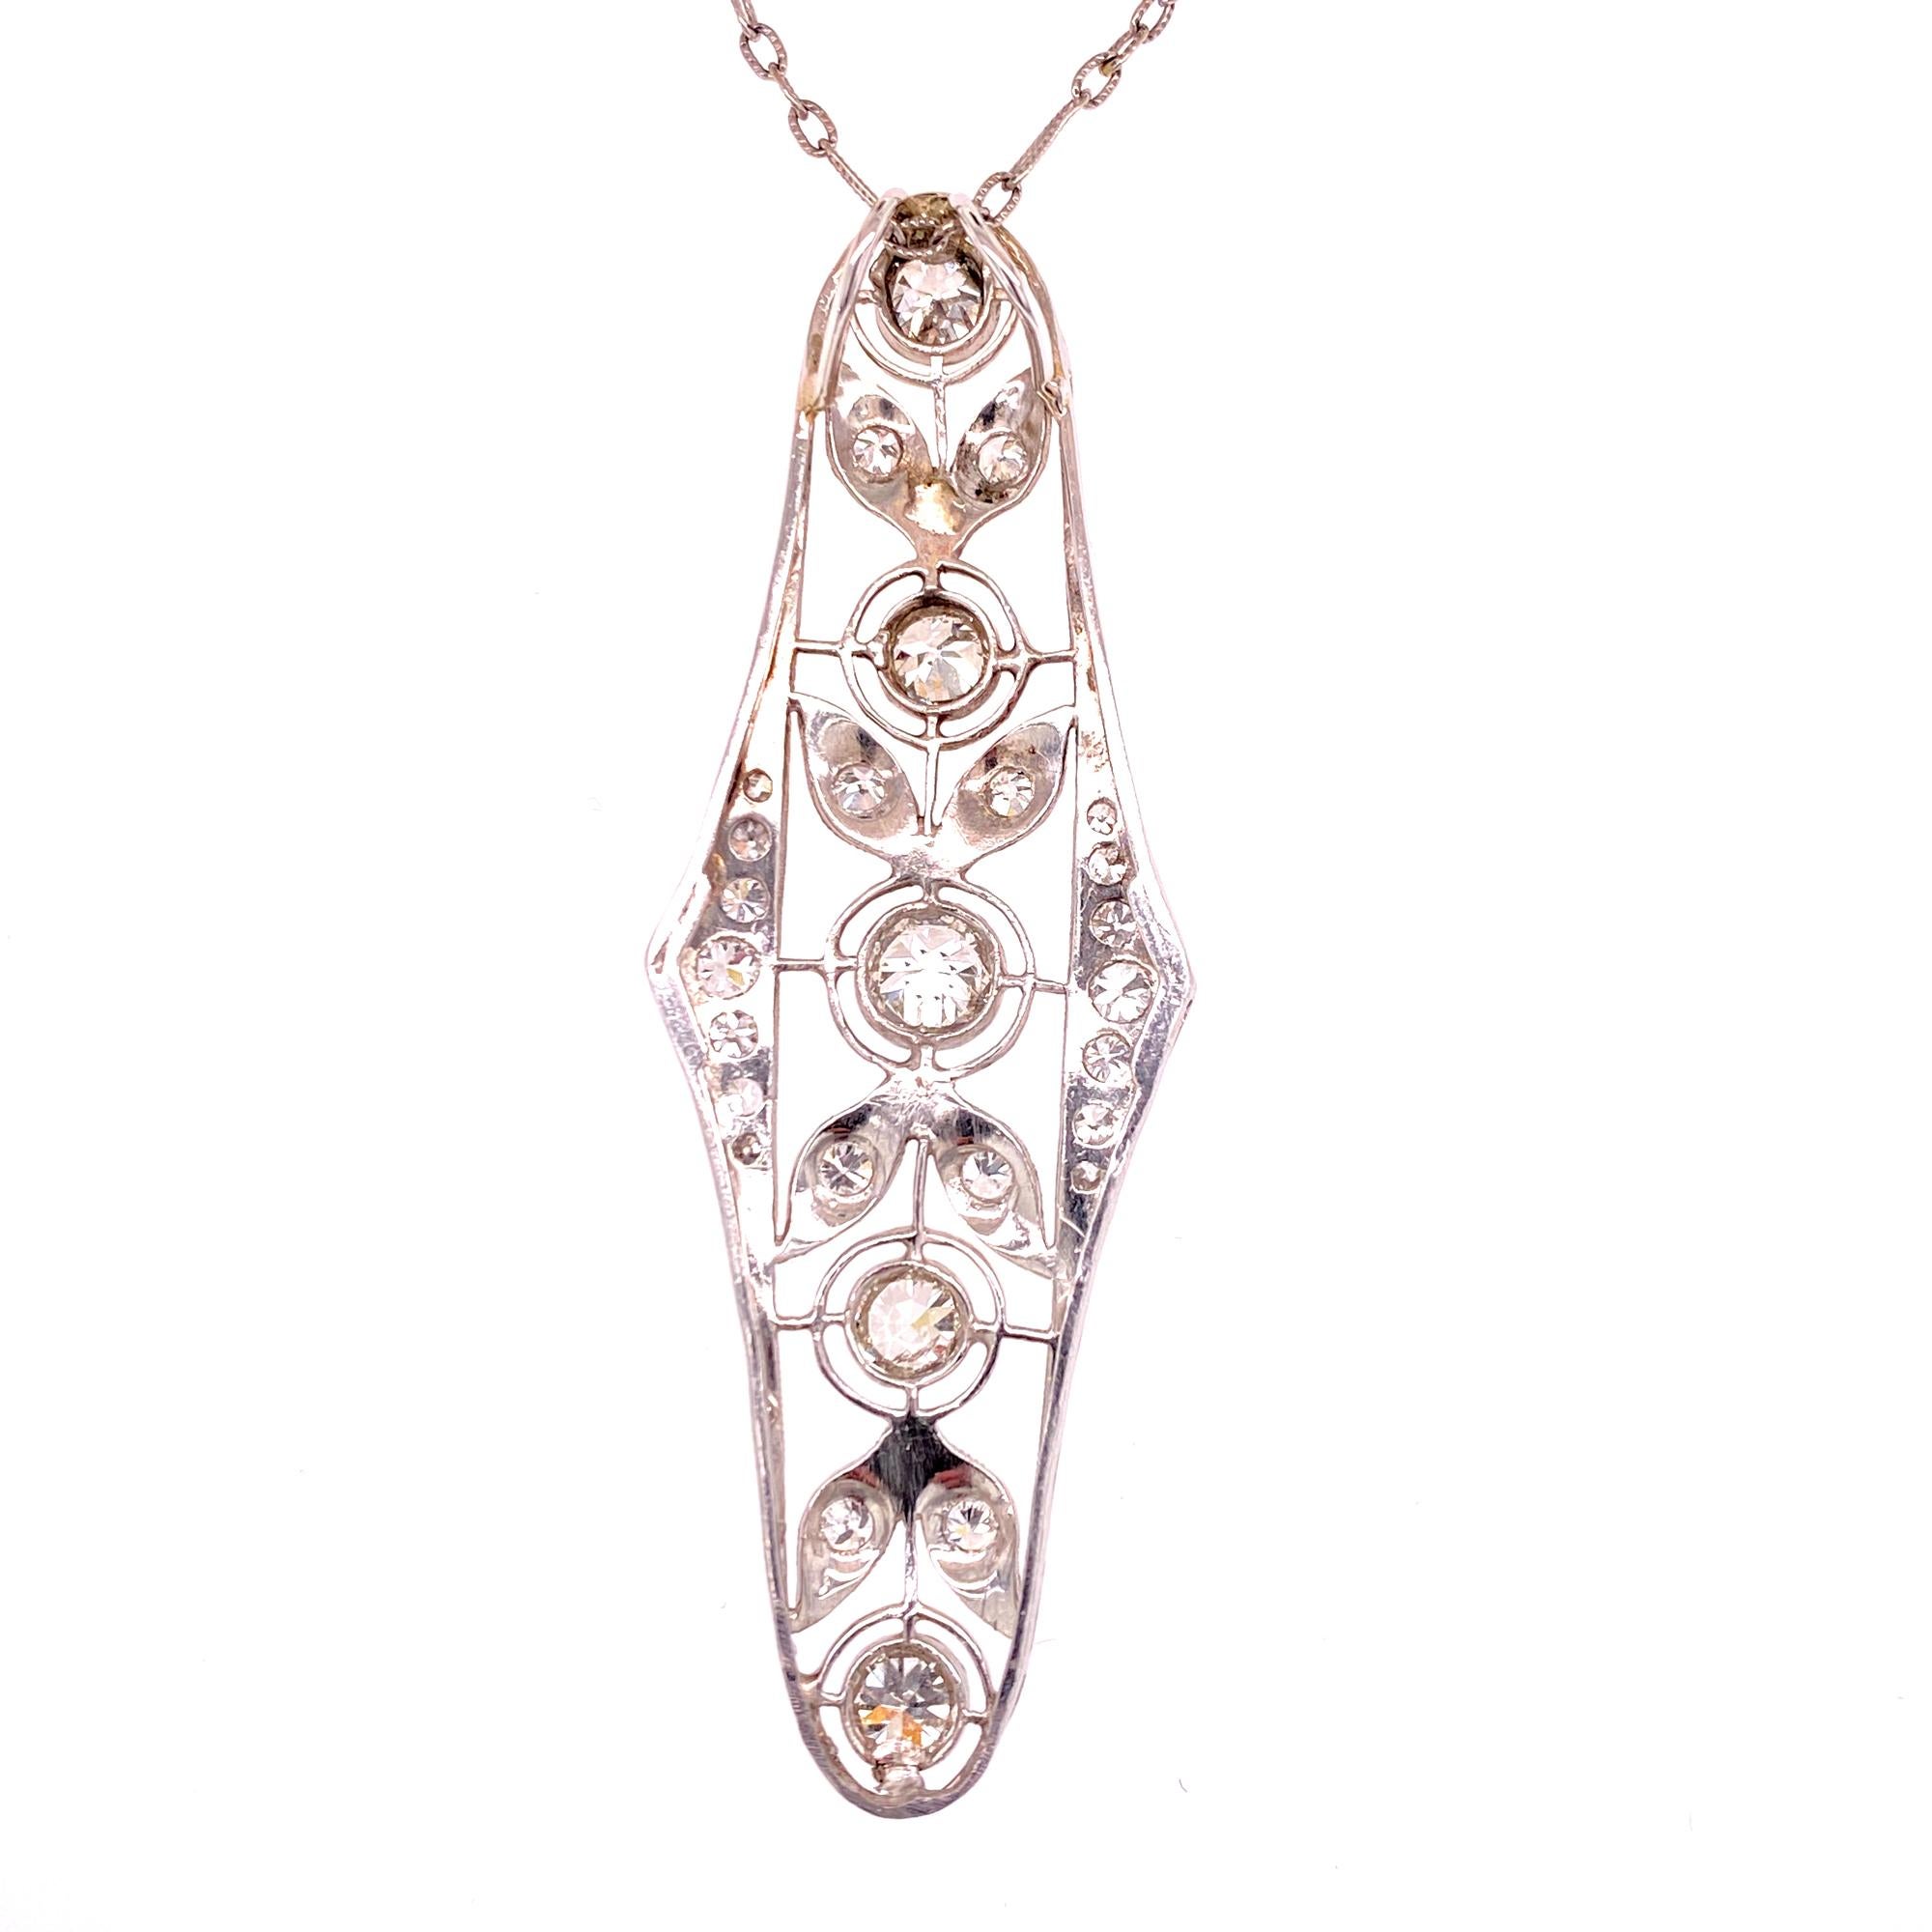 Beautiful original Art Deco diamond filigree pendant necklace. The long filigree pendant features 23 Old European Cut Diamonds (1.75 CTW) graded G-H color and SI1 clarity. The hand crafted pendant is fashioned in platinum and comes on an antique